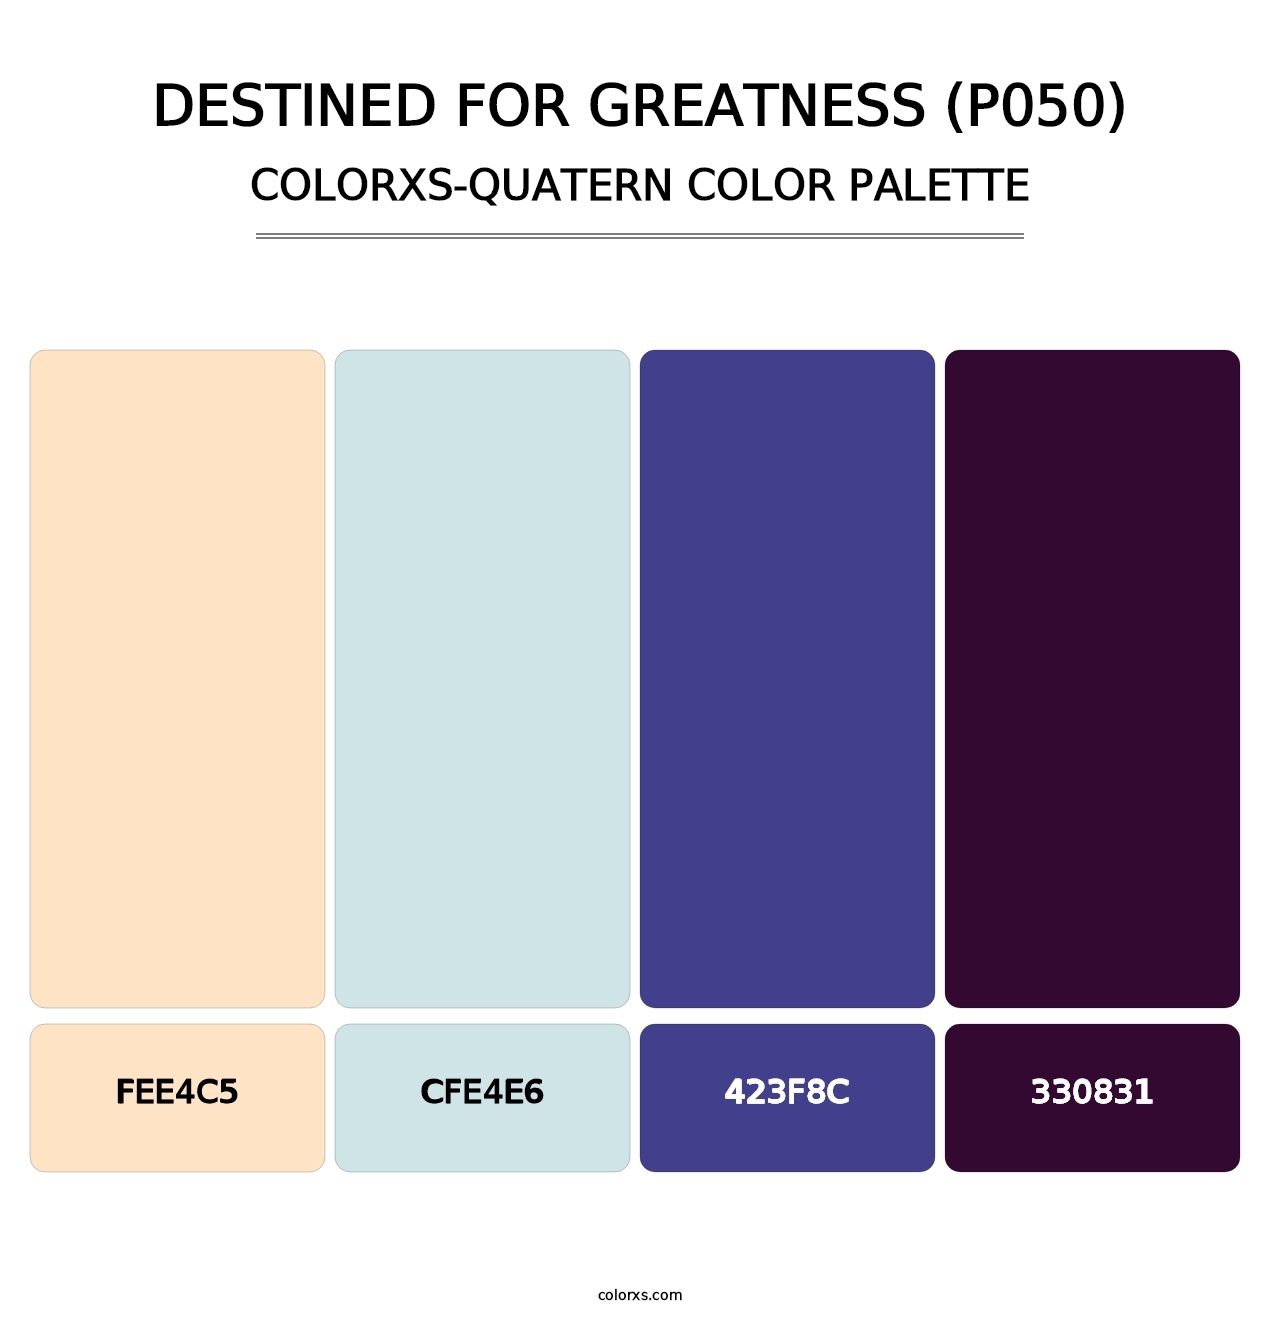 Destined for Greatness (P050) - Colorxs Quatern Palette